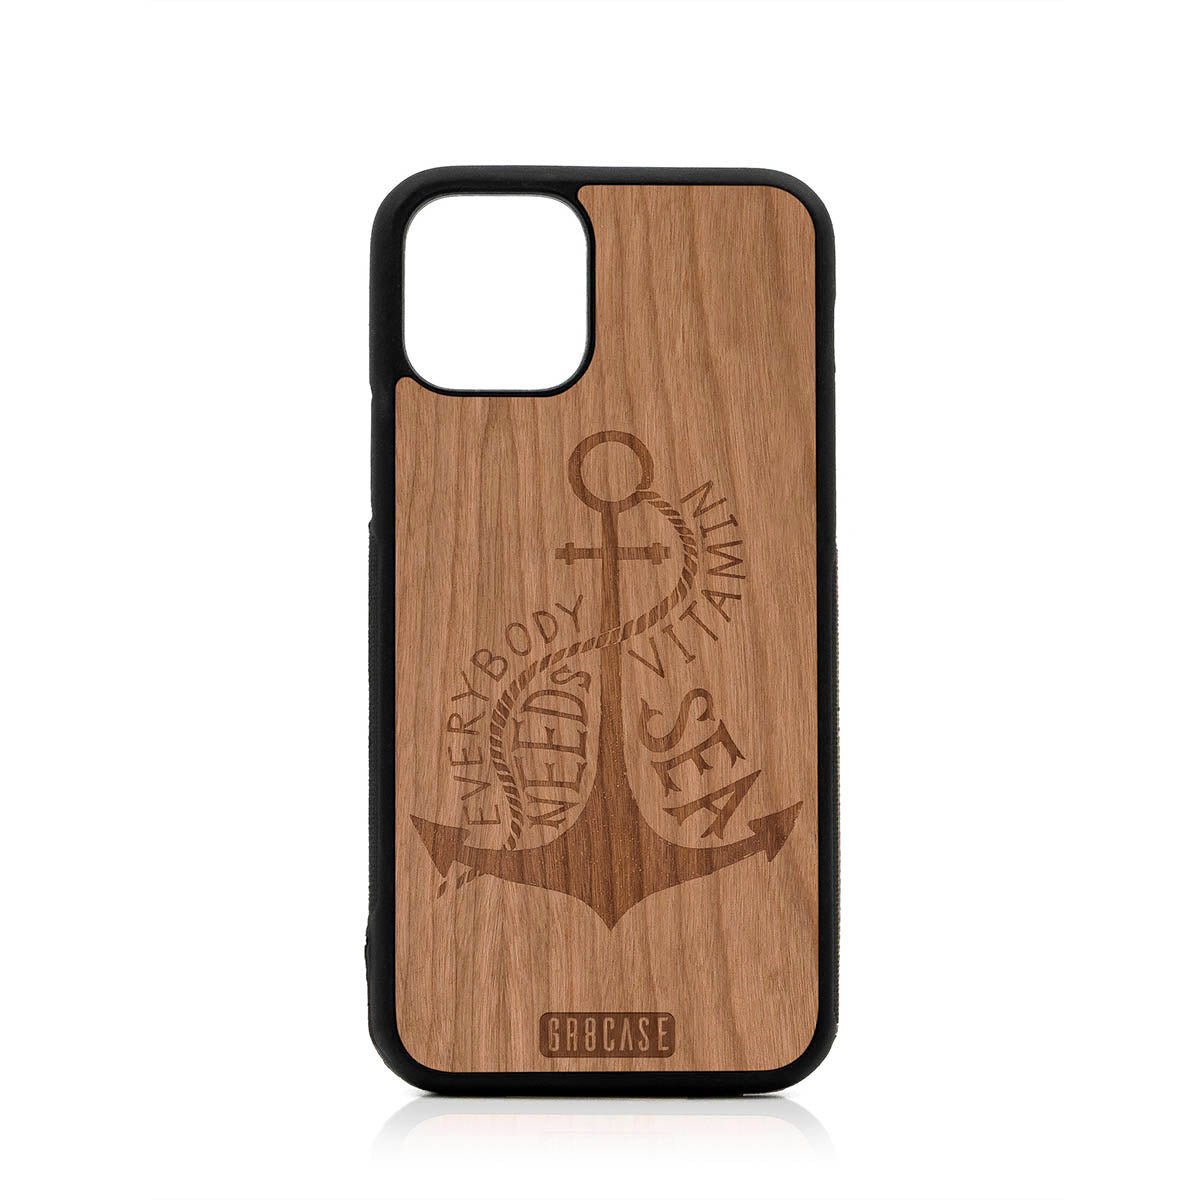 Everybody Needs Vitamin Sea (Anchor) Design Wood Case For iPhone 11 Pro by GR8CASE